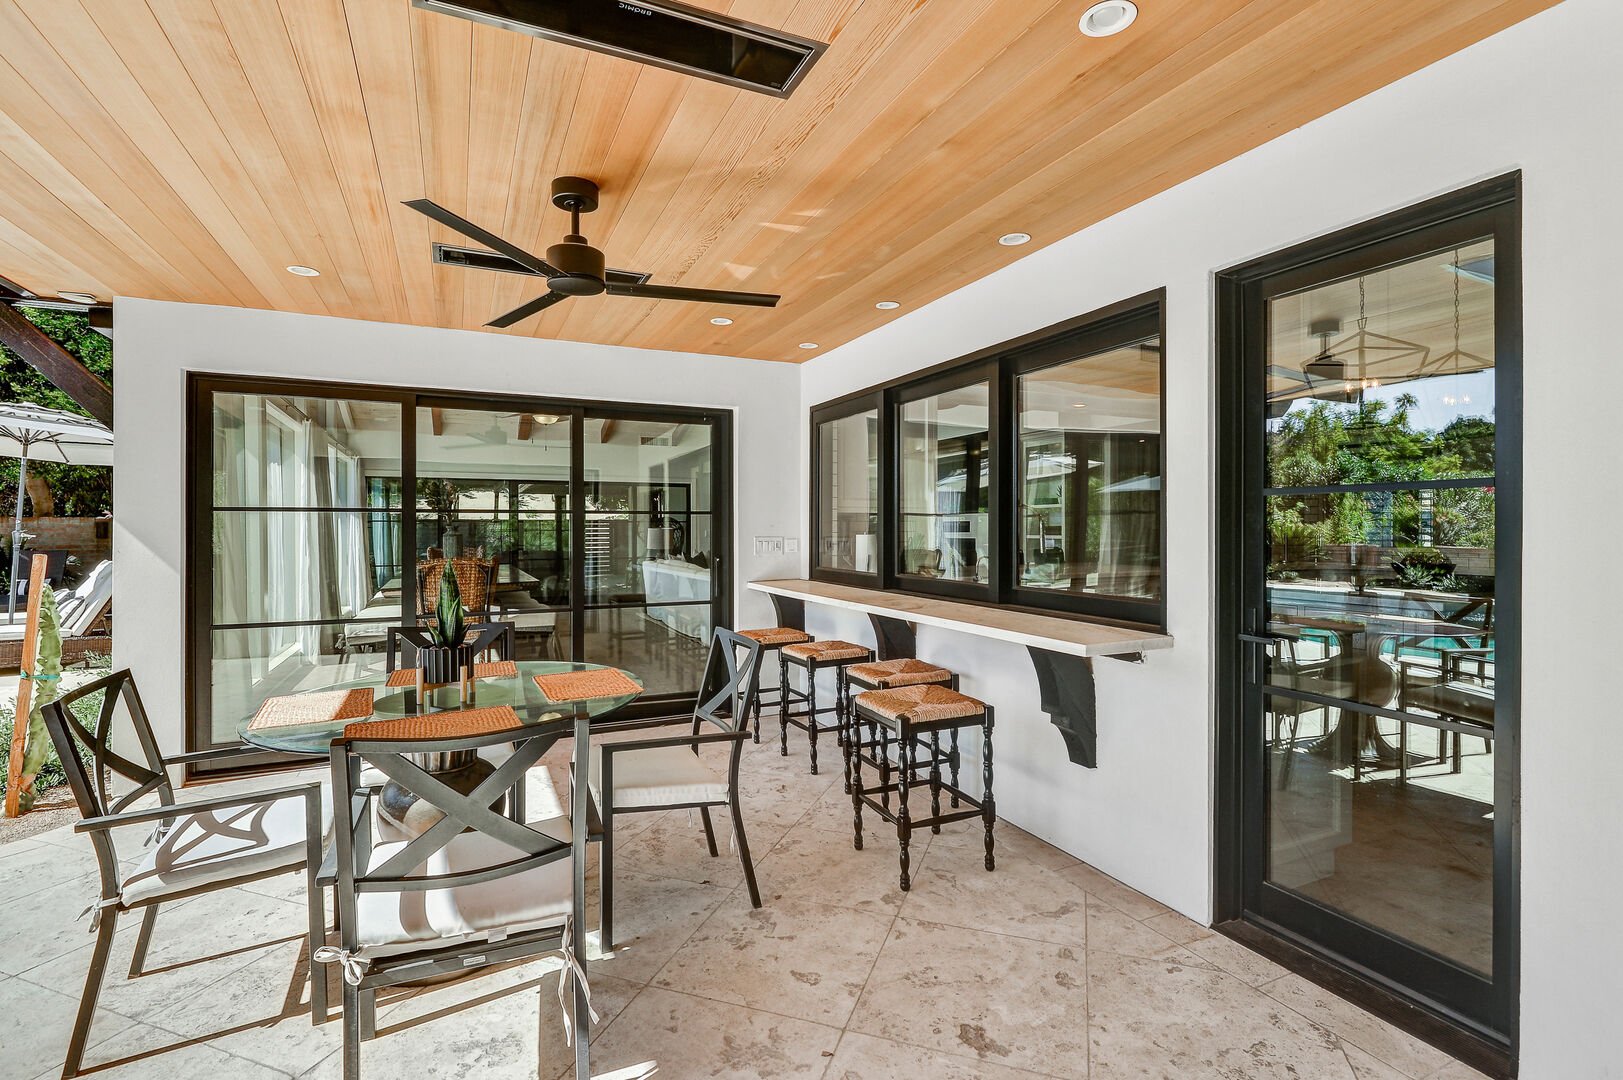 The outdoor dining area, equipped with ceiling heaters and bar stools, is located just outside the sliding kitchen window.